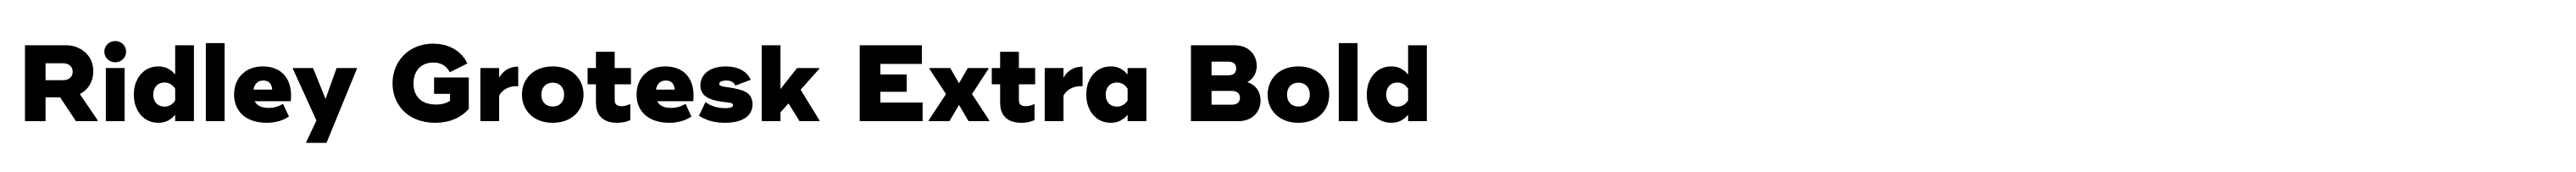 Ridley Grotesk Extra Bold